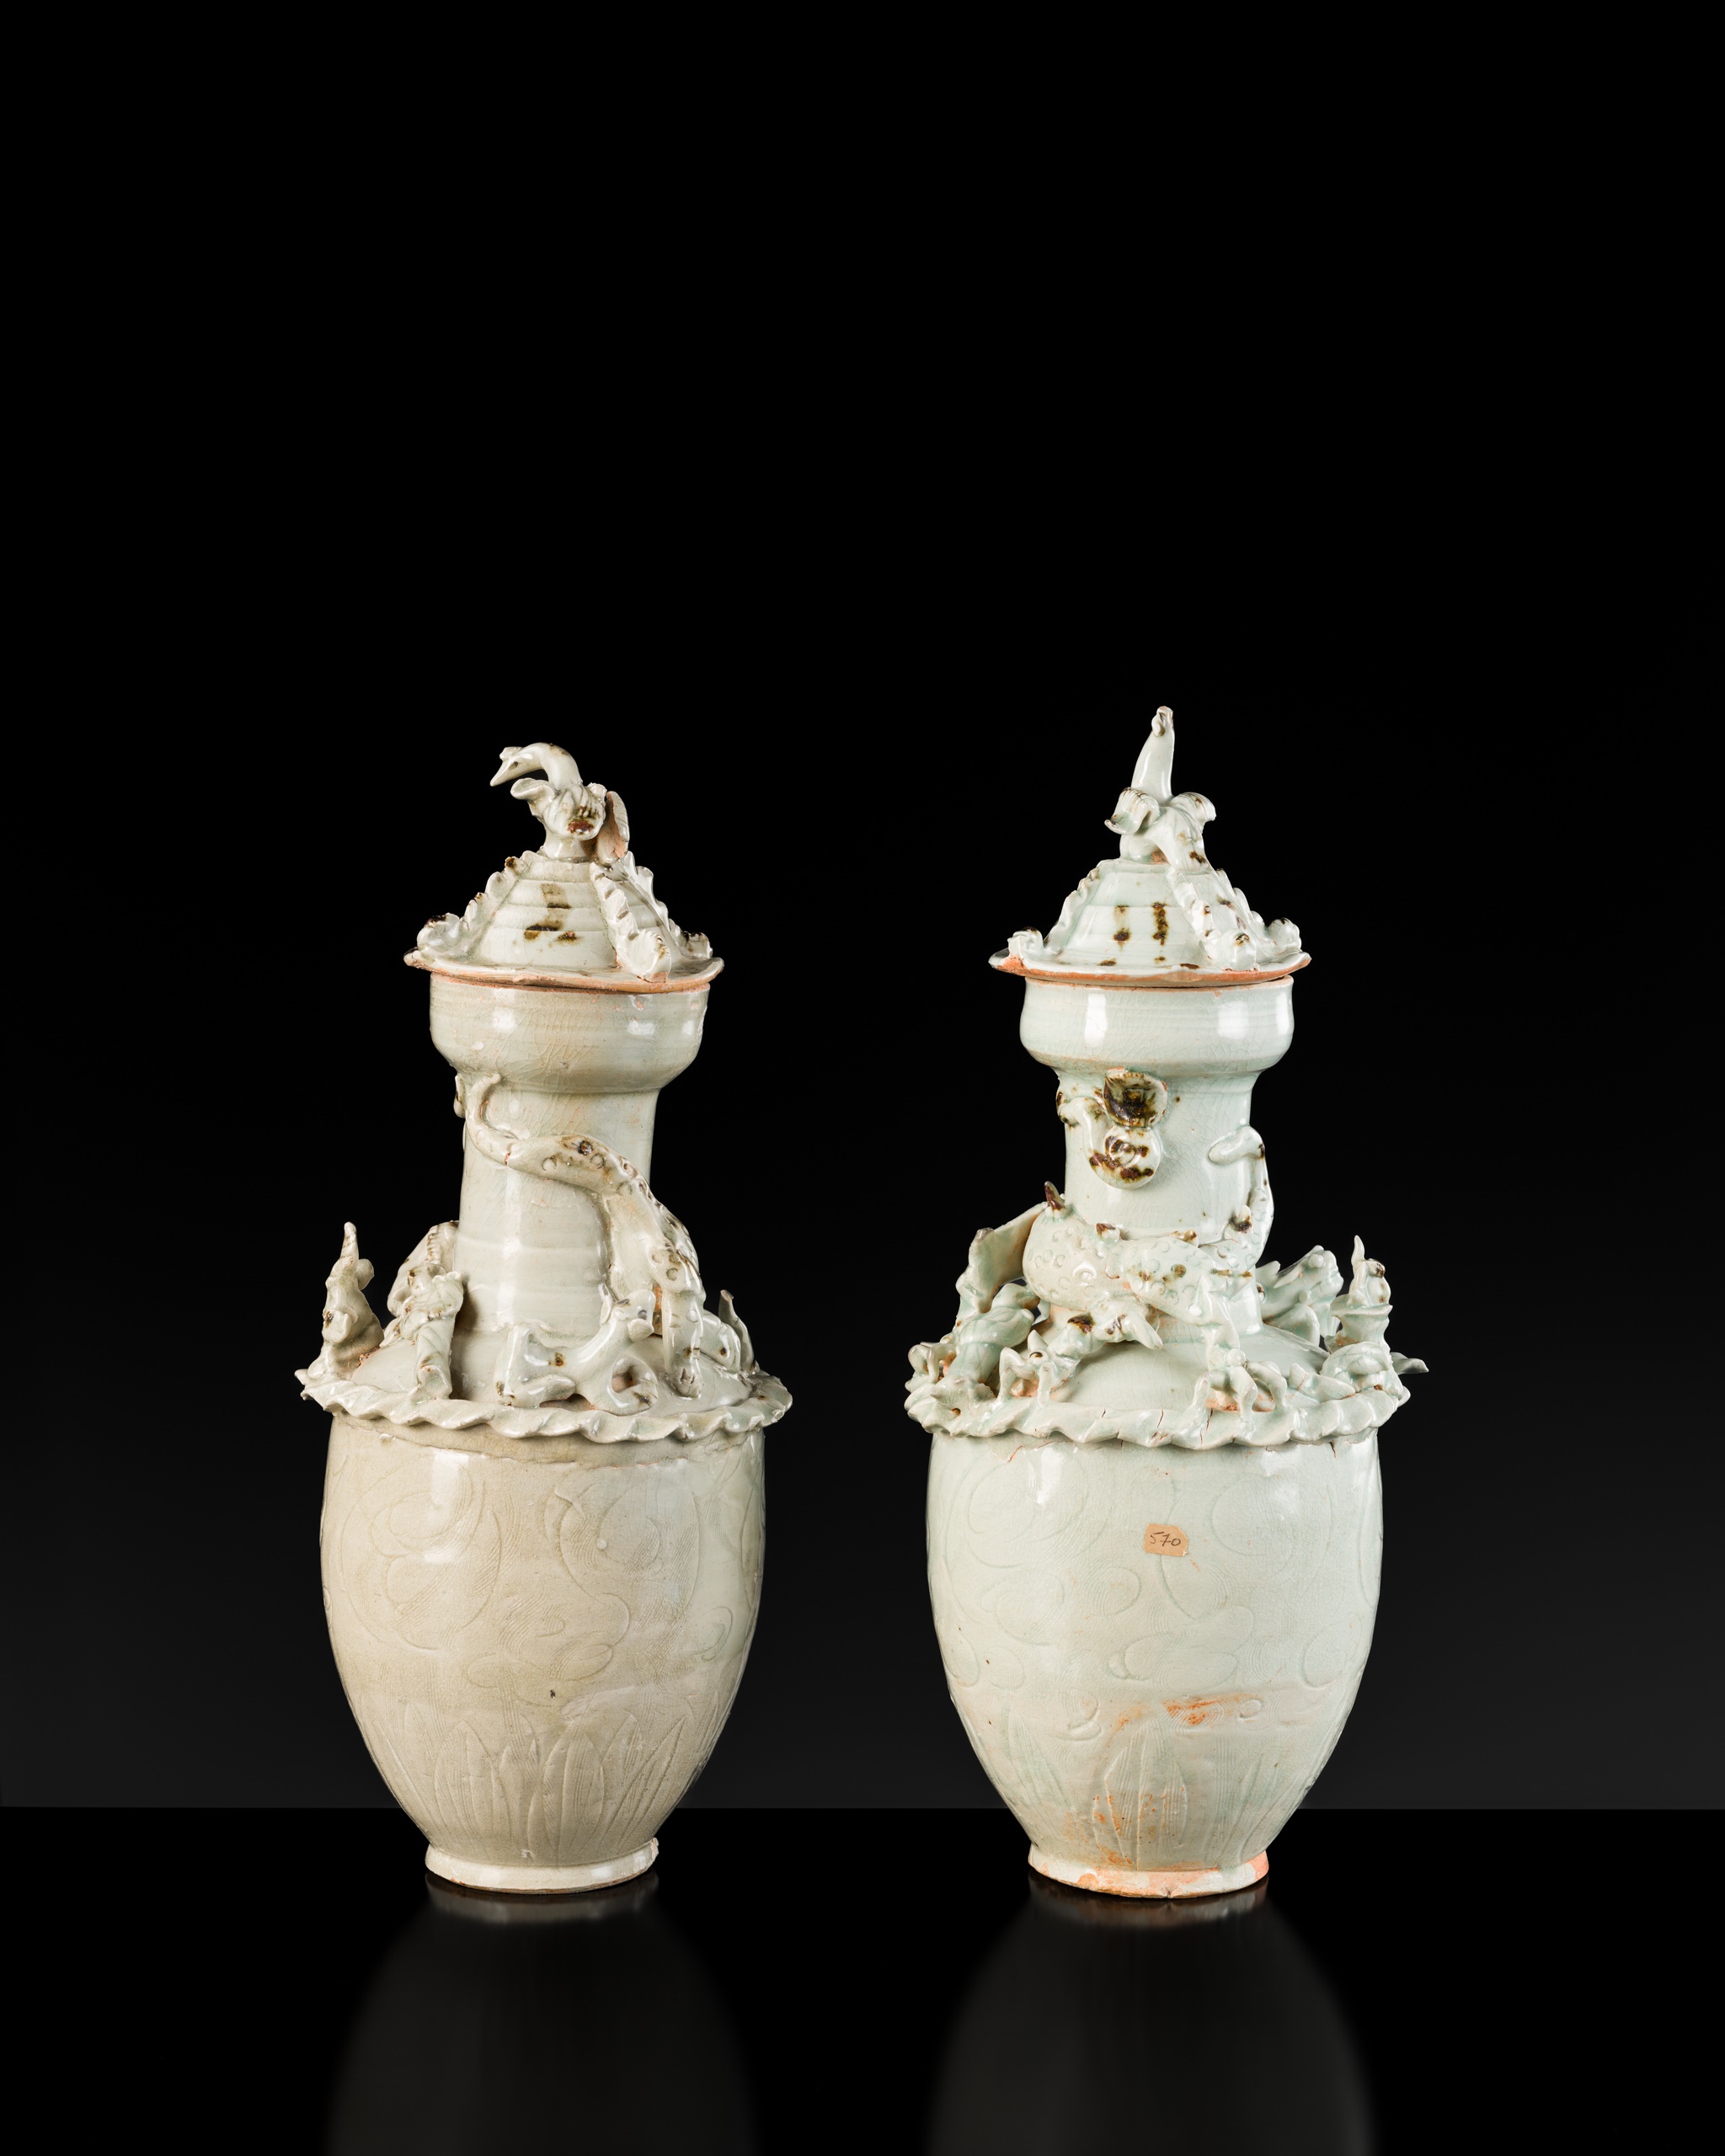 A PAIR OF QINGBAI FUNERARY JARS AND COVERS, SONG DYNASTY - Image 8 of 12